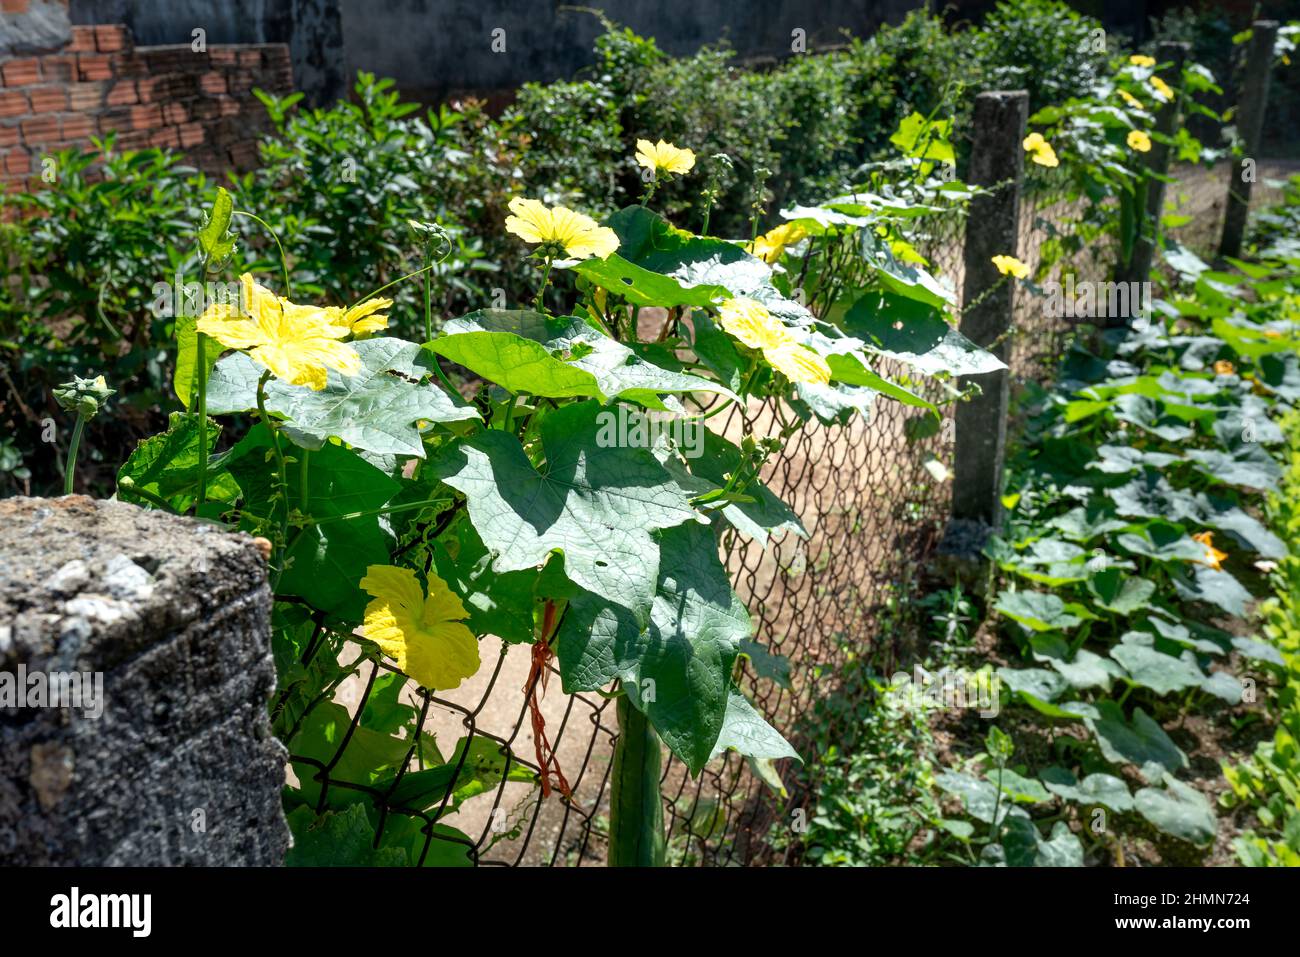 Luffa cylindrica, the sponge gourd, Egyptian cucumber or Vietnamese luffa, is a climbing plant that is grown annually for its fruit. Stock Photo